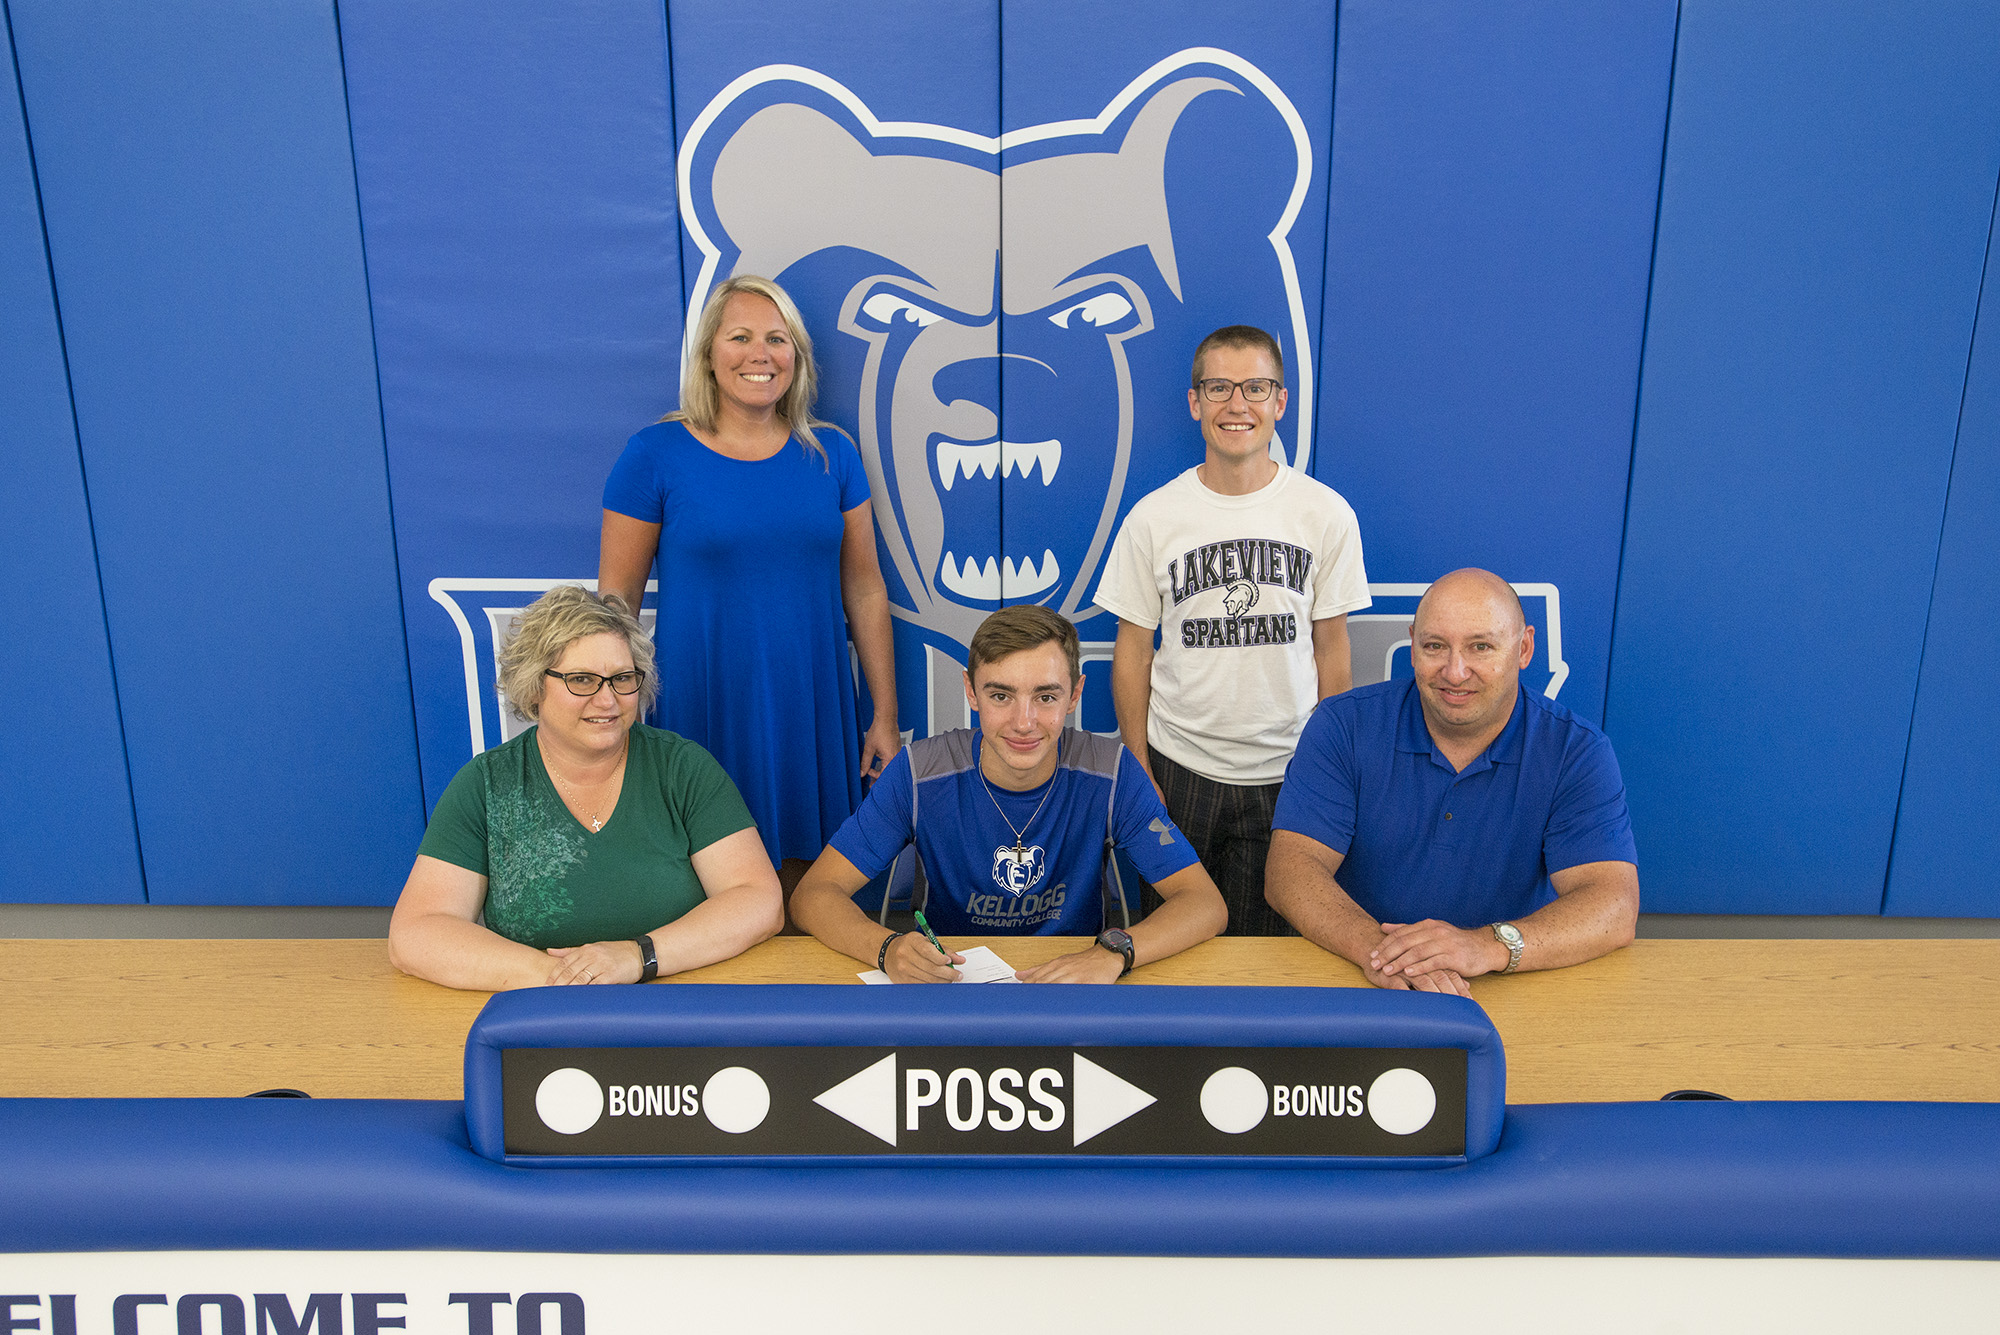 Pictured in this KCC cross-country signing photo, from left to right, are Angela Glubke (mother), Head KCC Cross-Country Coach Erin Lane, Joseph Glubke, Lakeview High School Boy’s Cross-Country Coach Jake Zimmerman, and Scott Glubke (father).